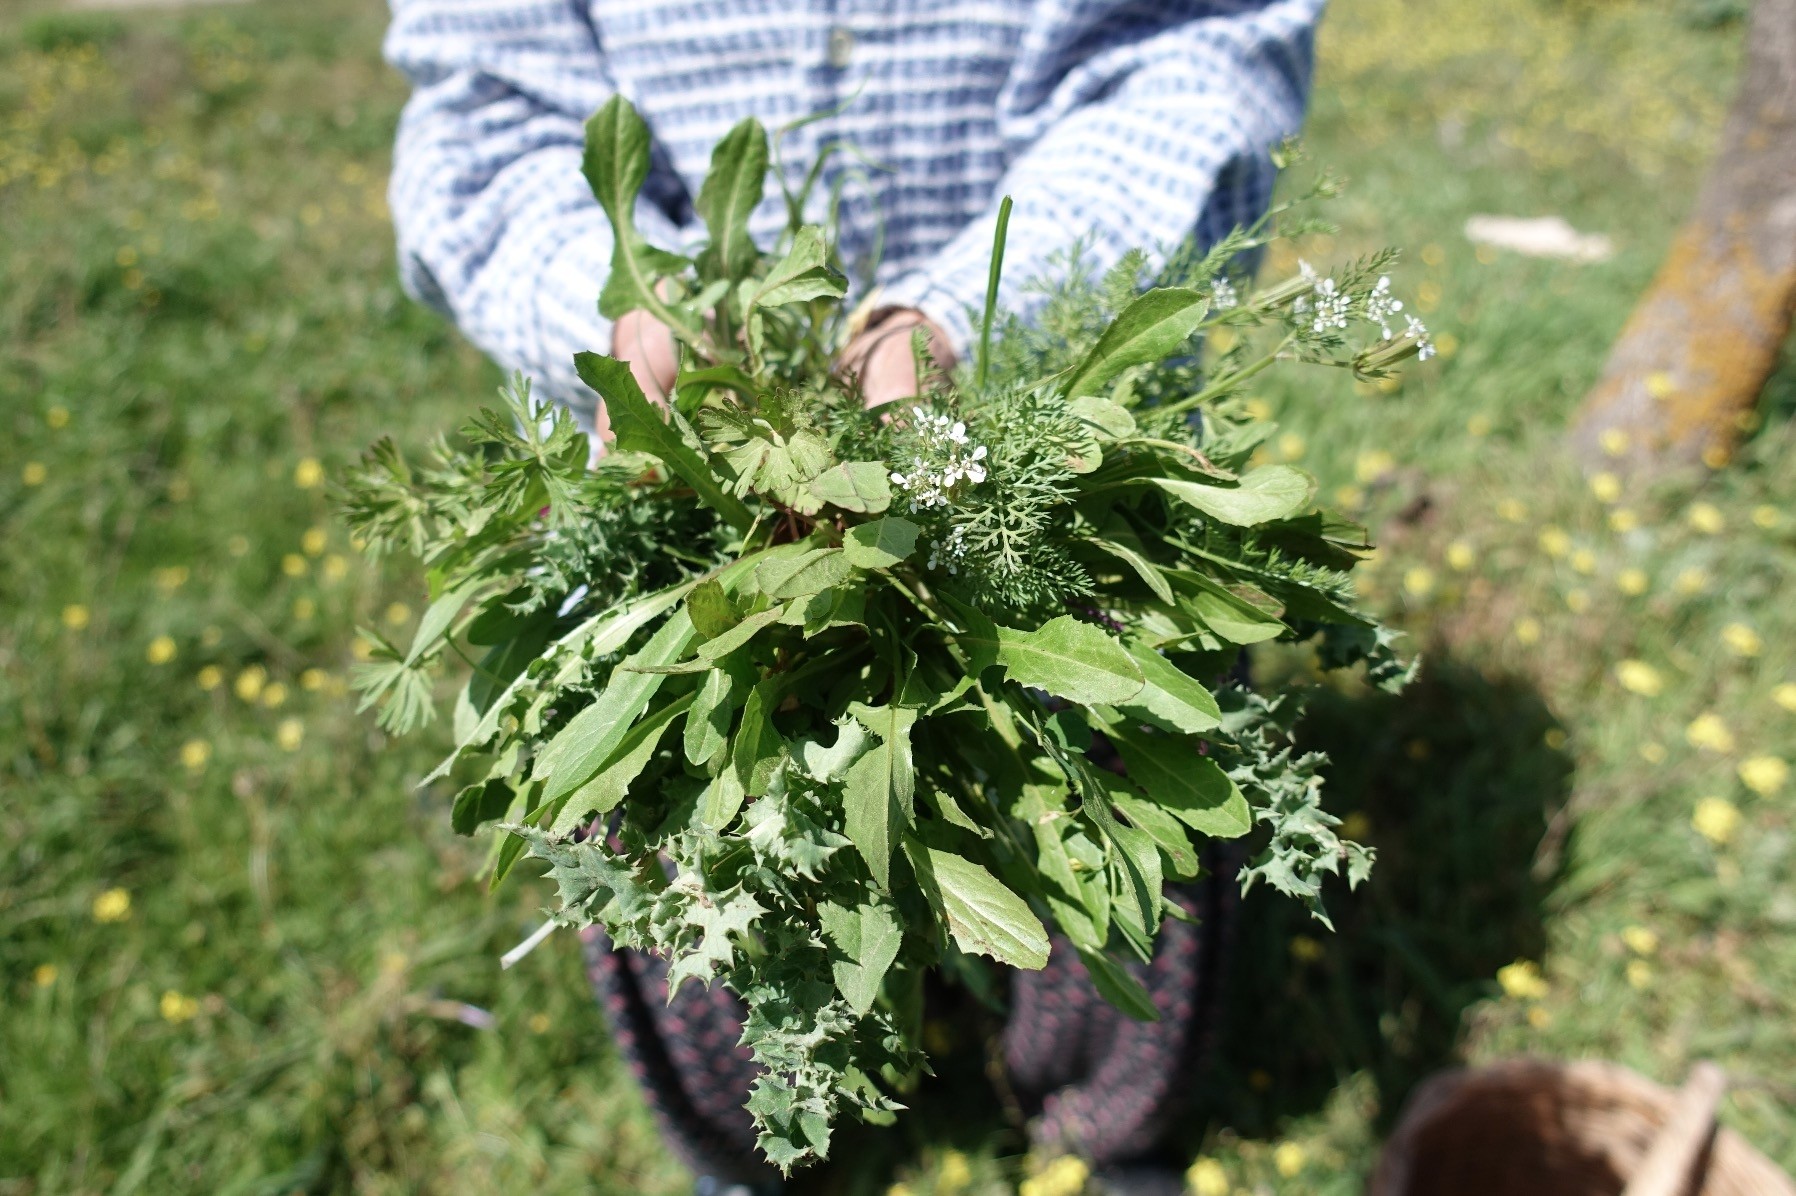 A variety of herbs grown in the Aegean will be displayed and sold during the festival. Participants will also have a chance to learn how to use and cook these herbs at a number of workshops.